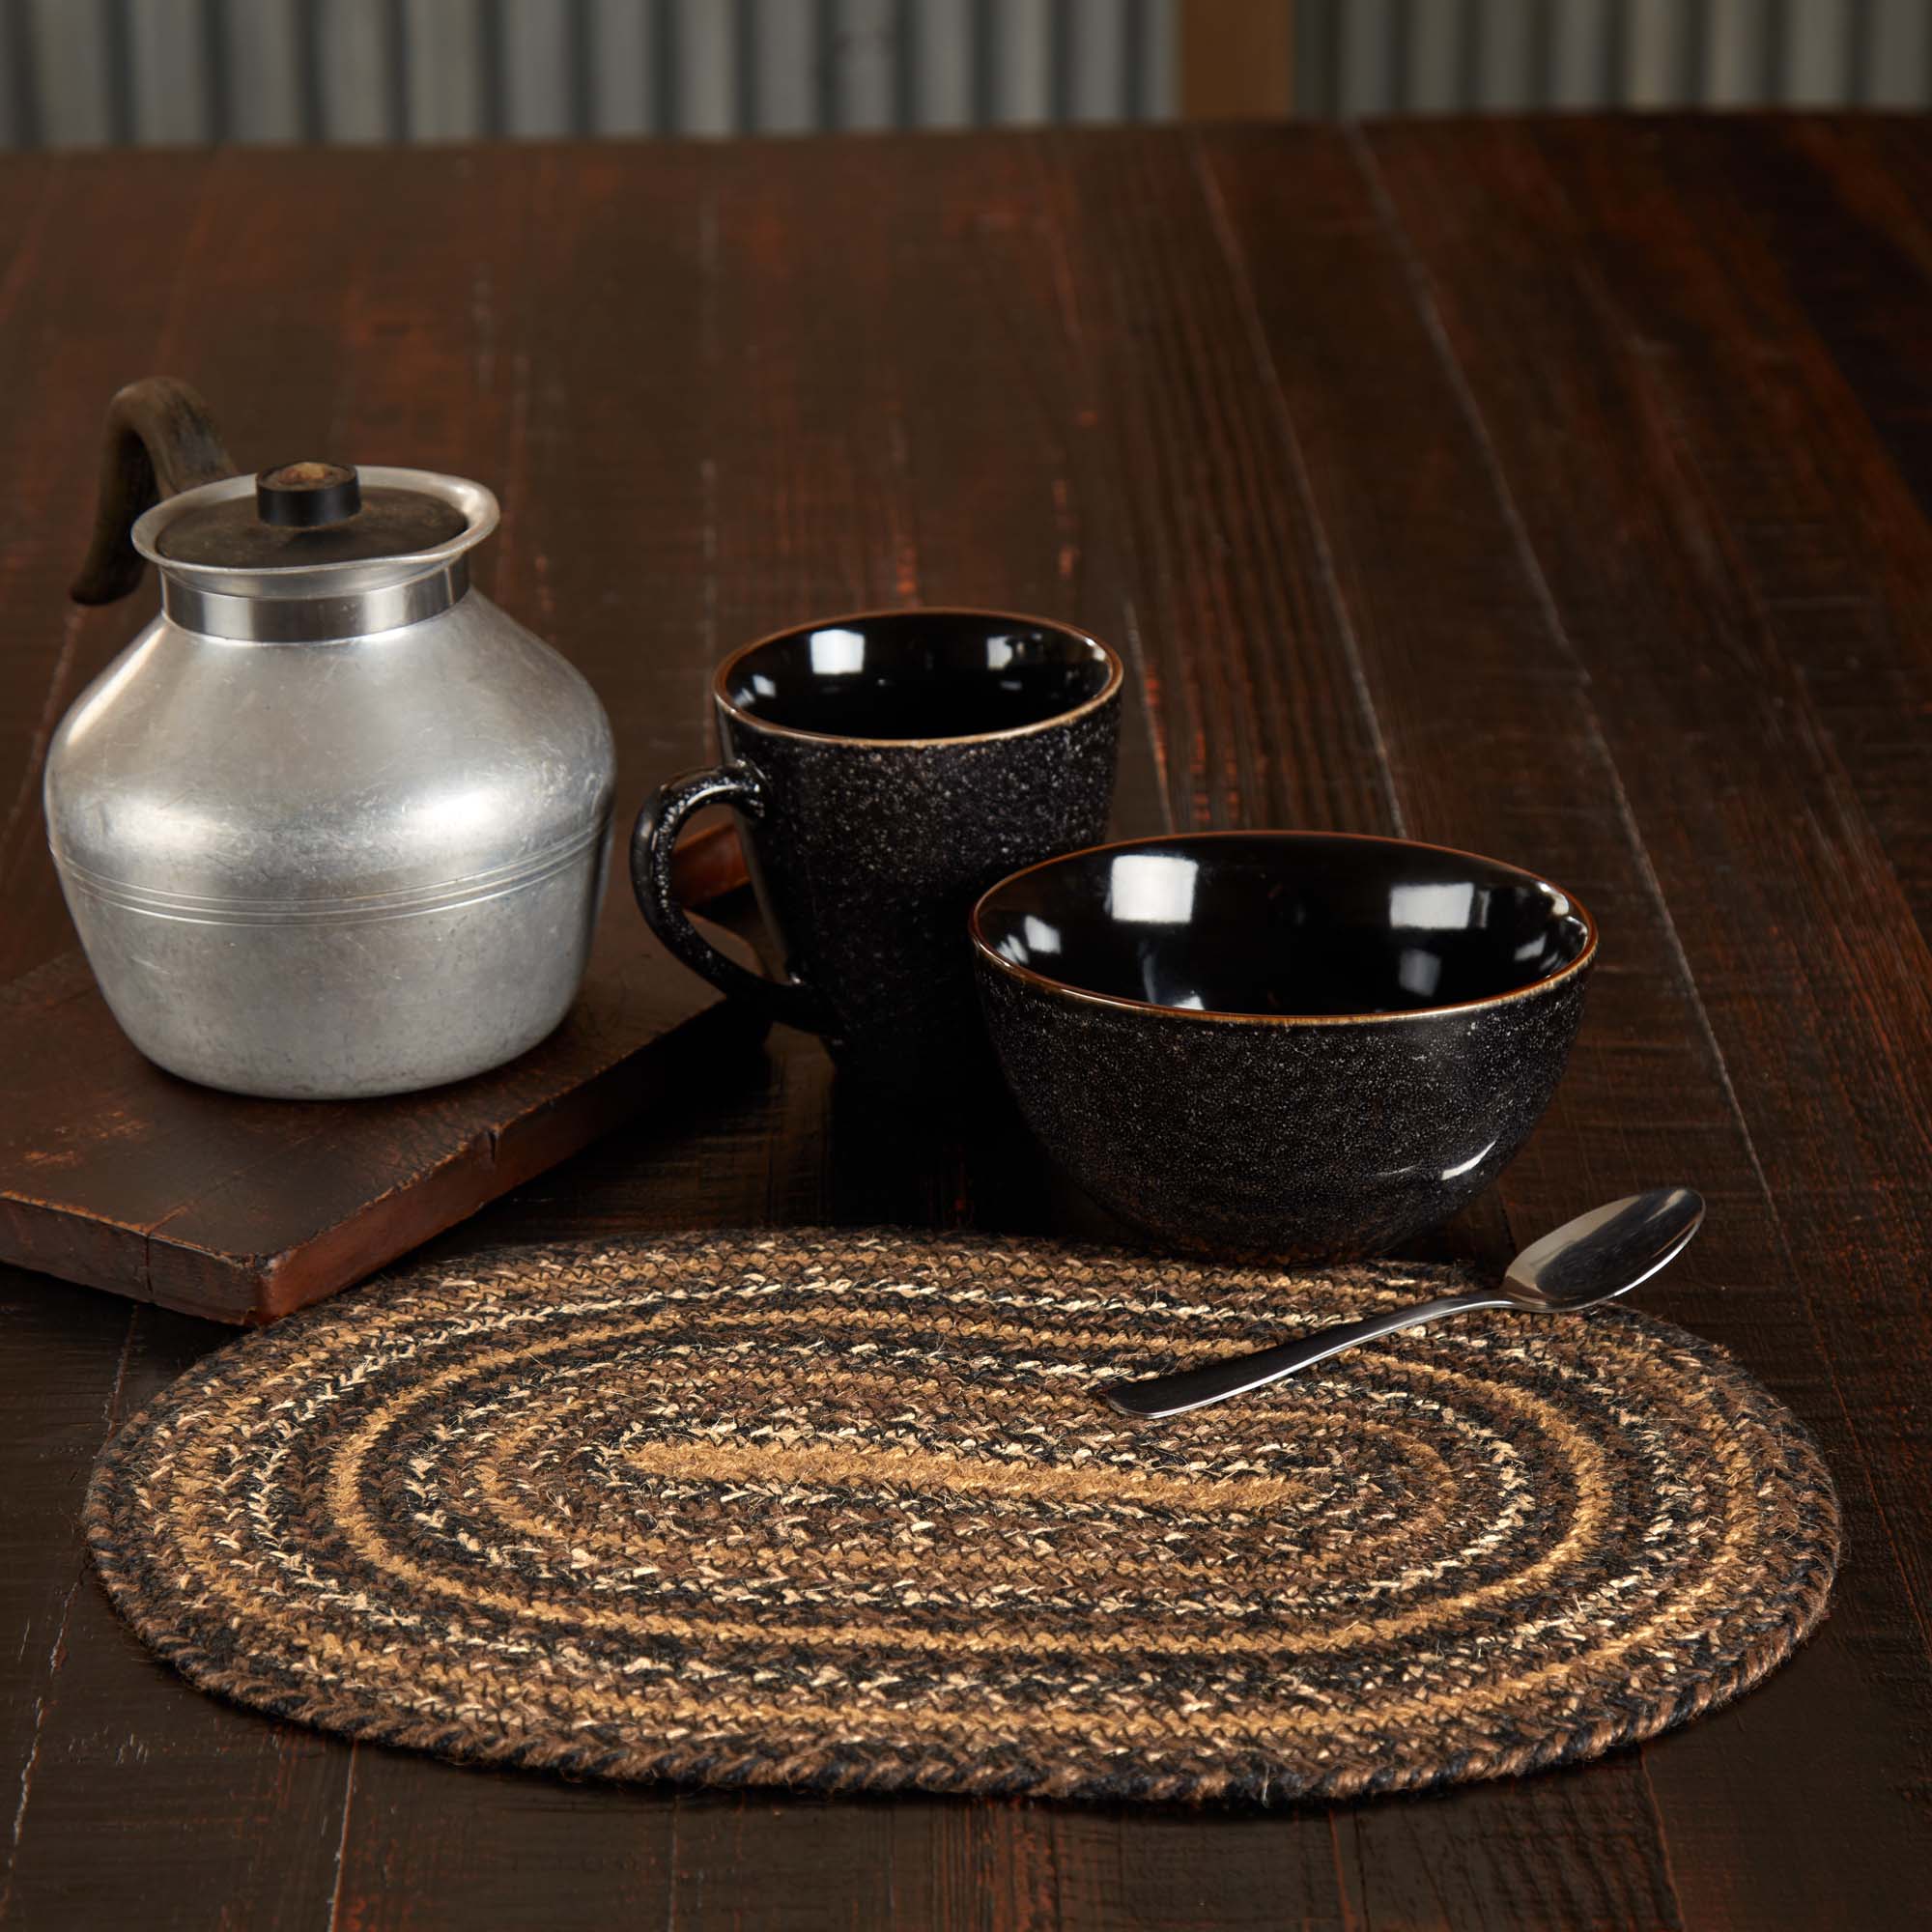 Espresso Jute Braided Oval Placemat 10"x15" VHC Brands